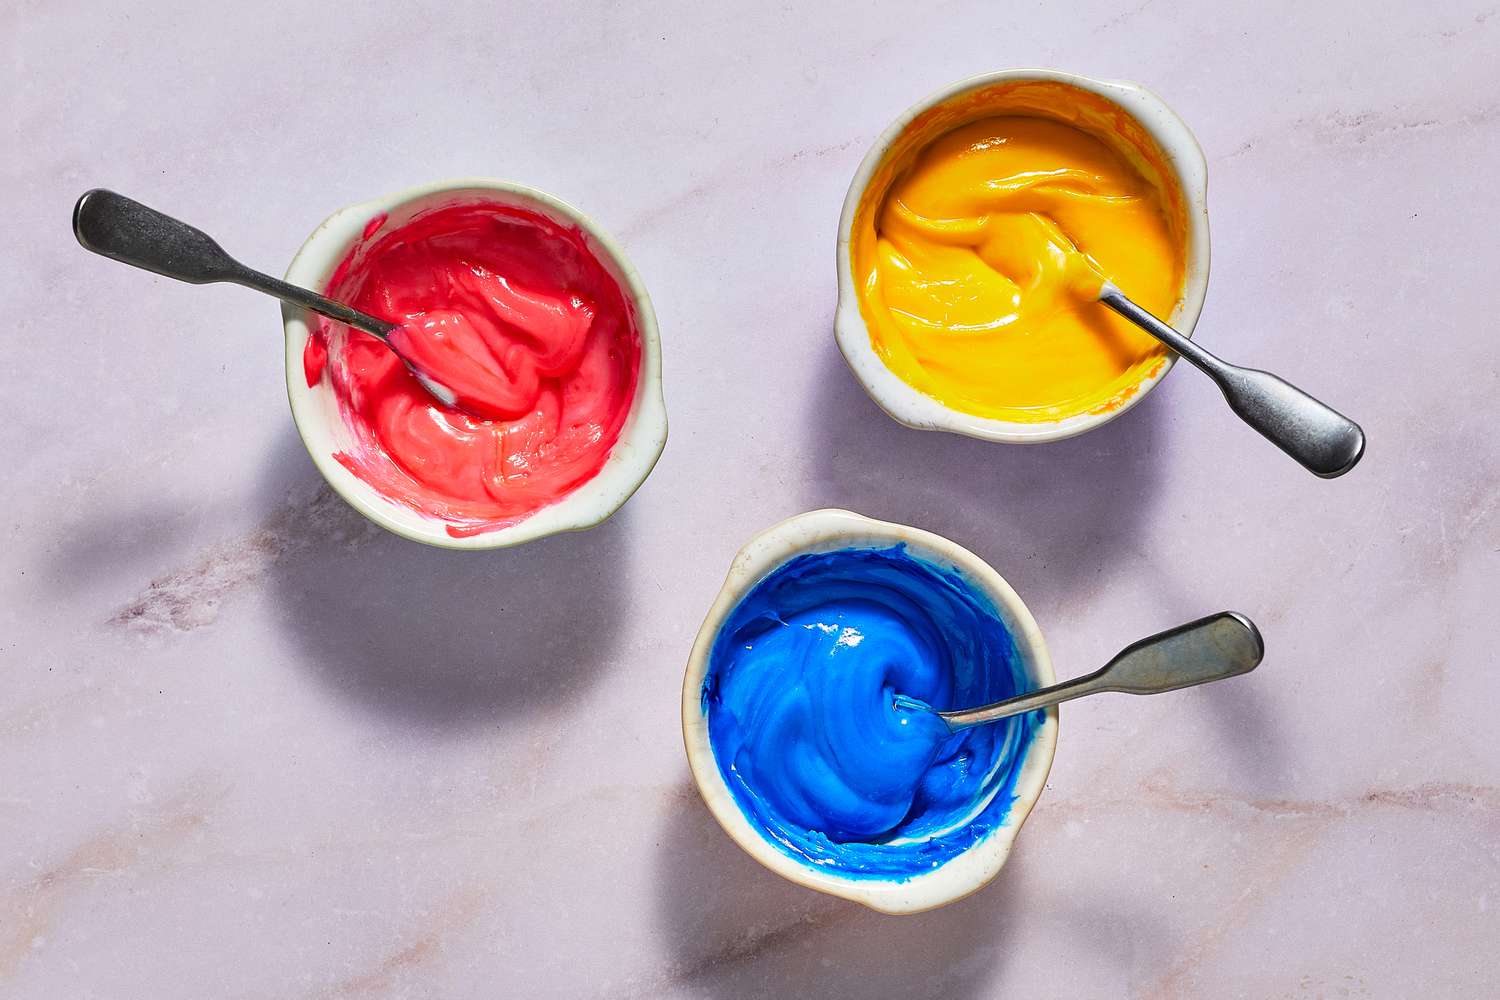 Small bowls of red, yellow, and blue sprinkle batter